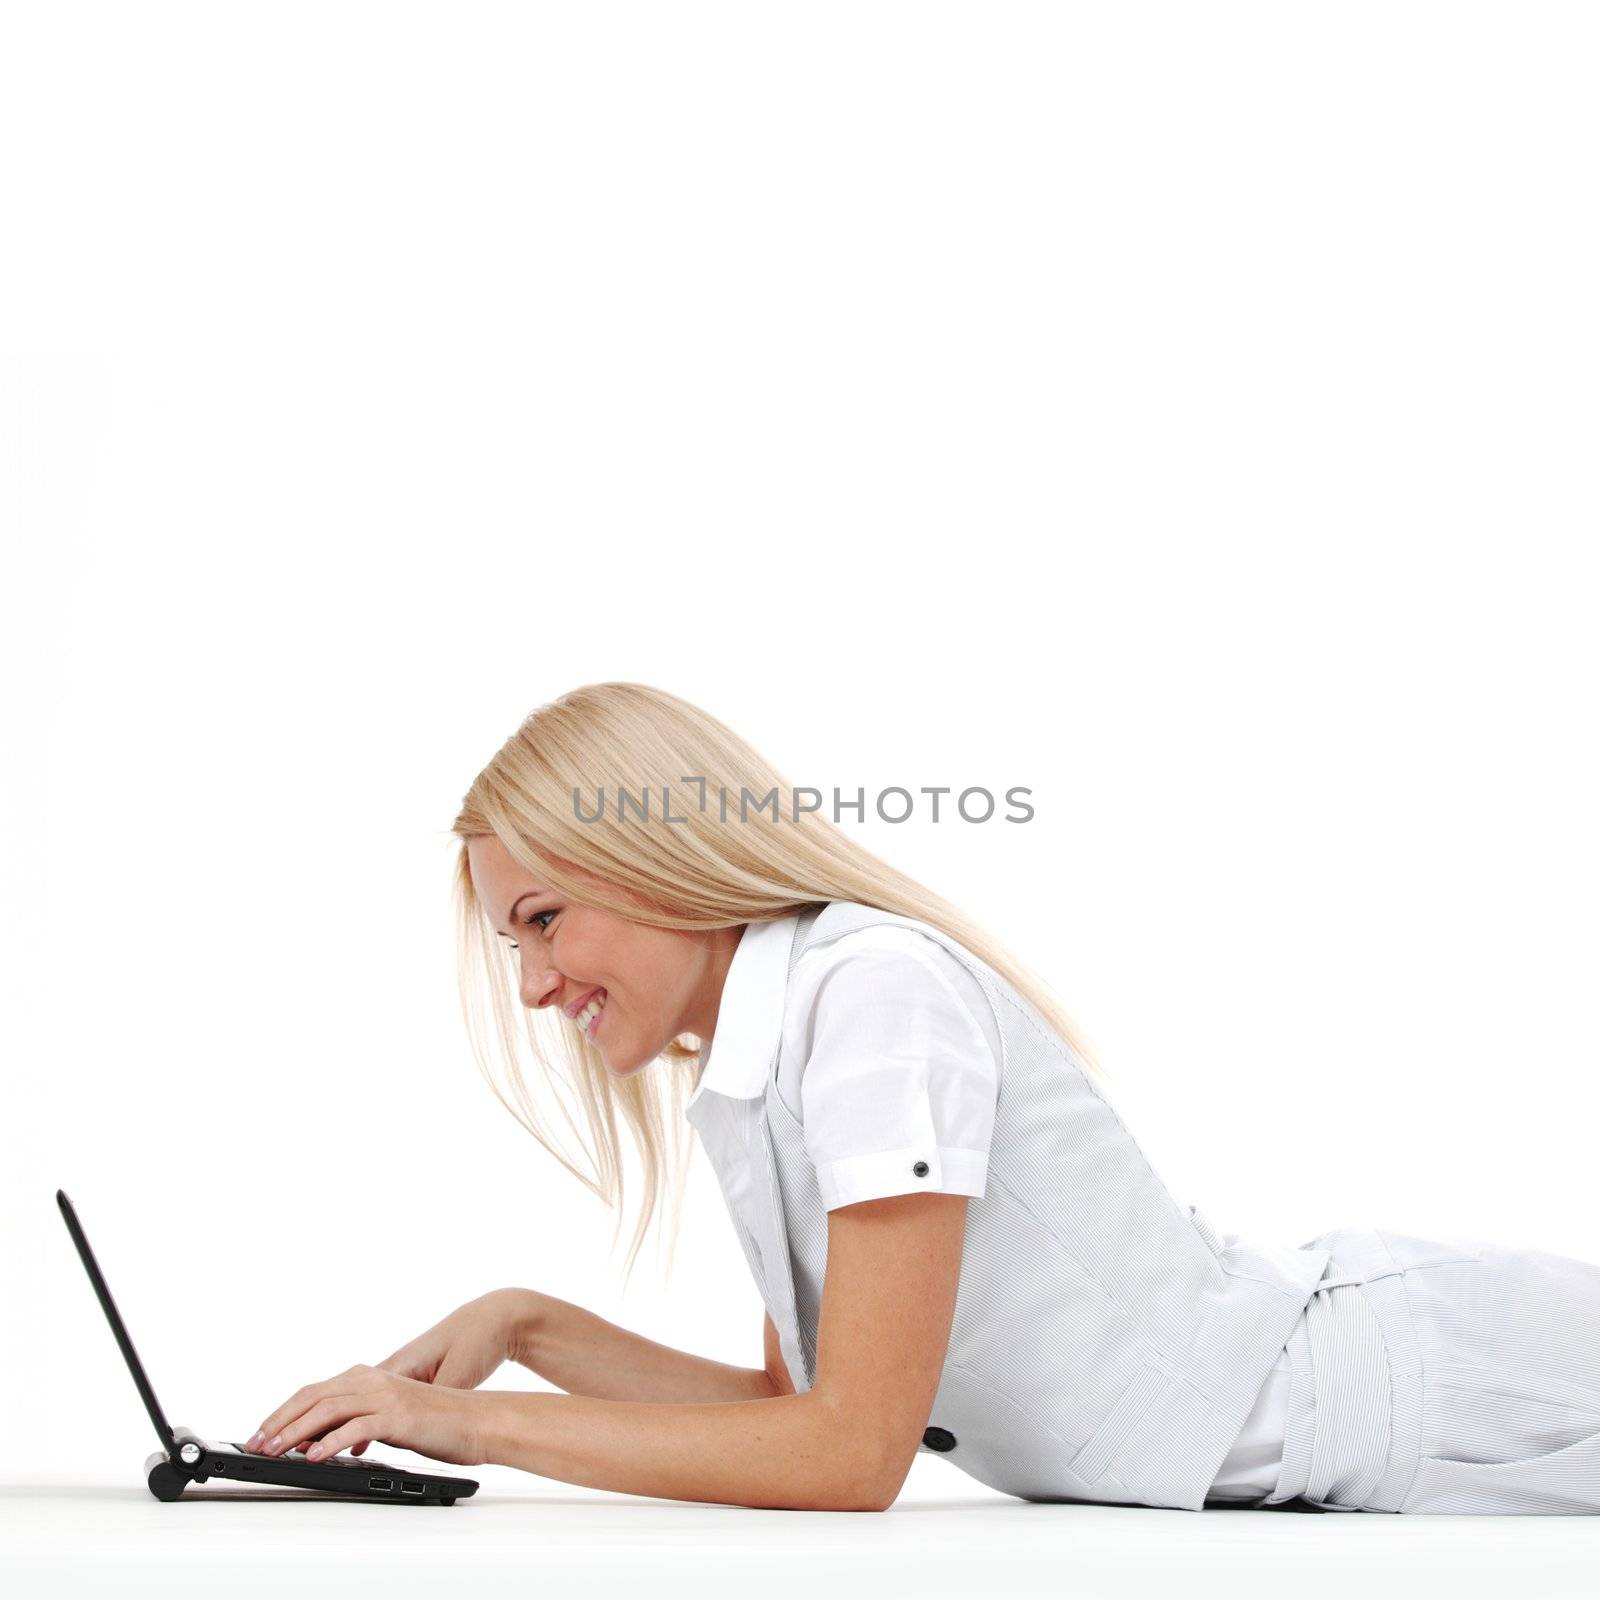 business woman lies and working on laptop